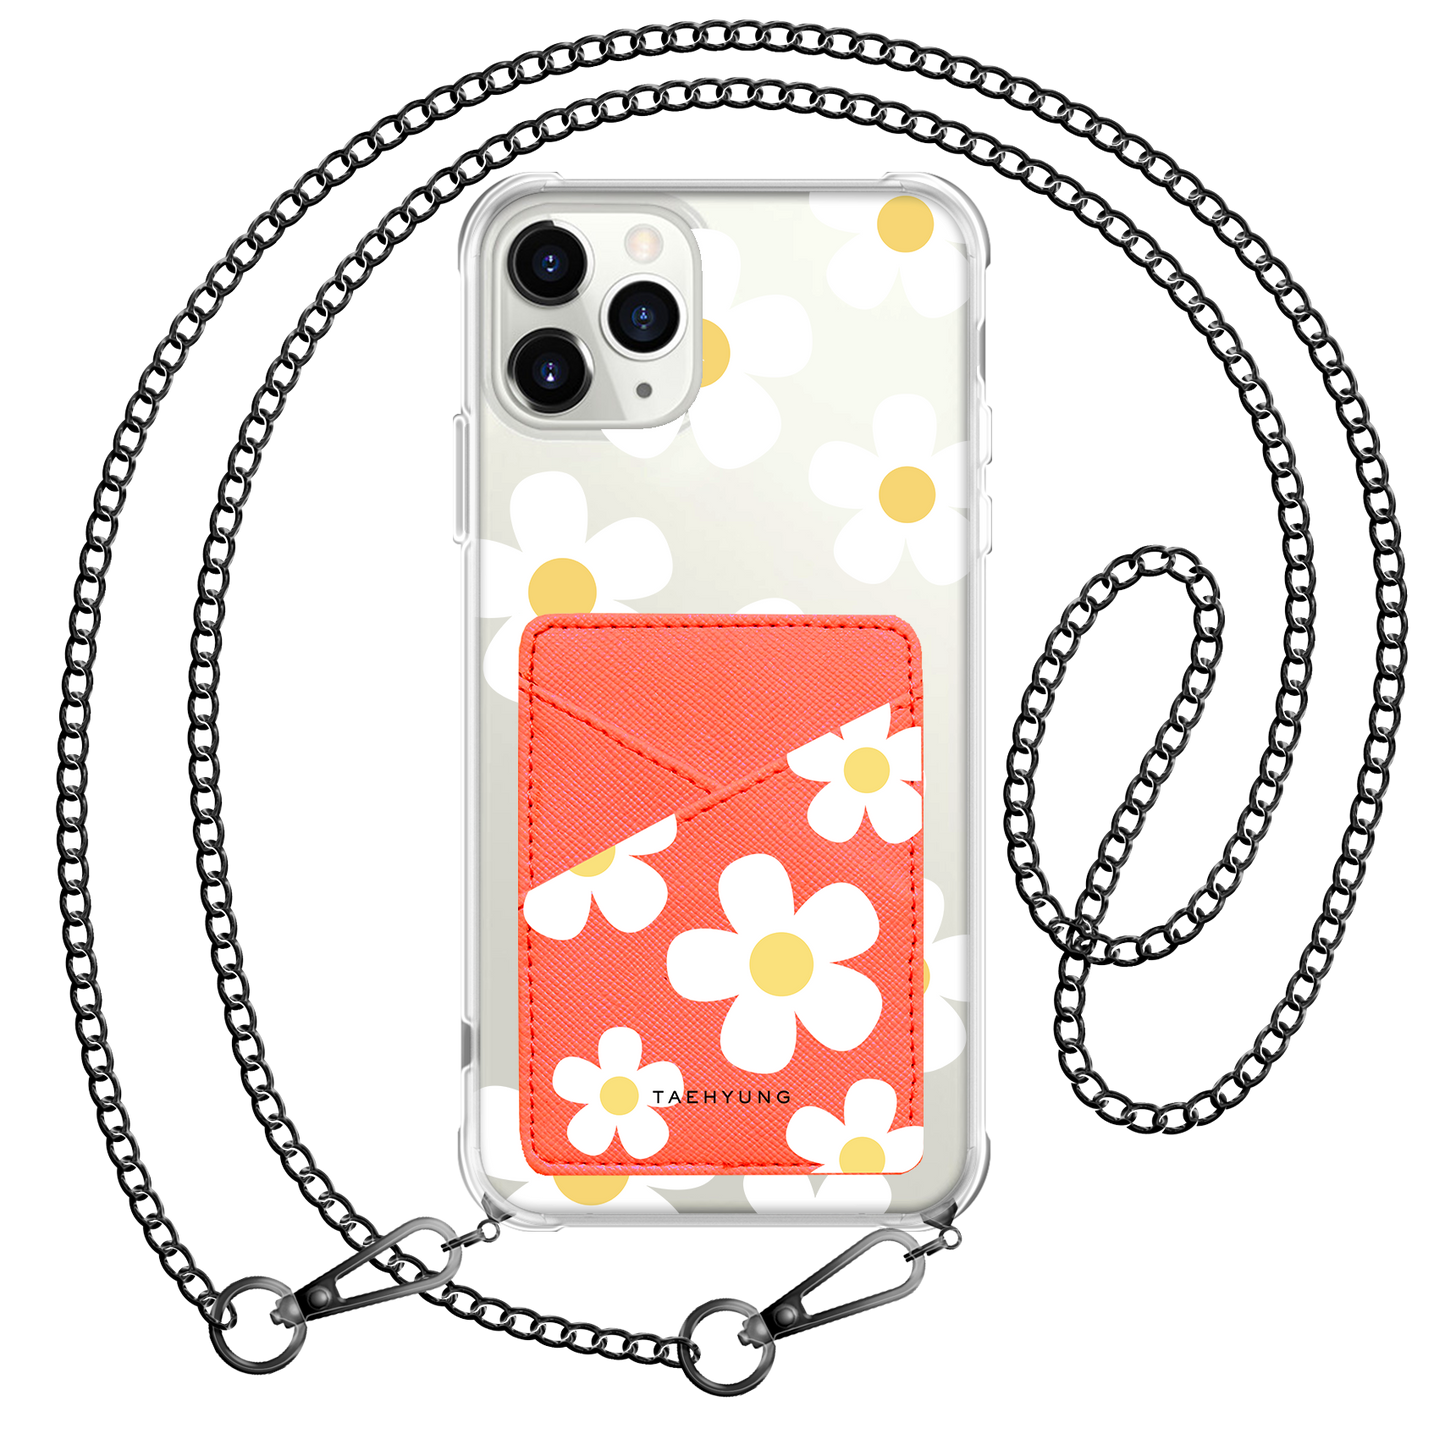 iPhone Phone Wallet Case - Daisy 2.0